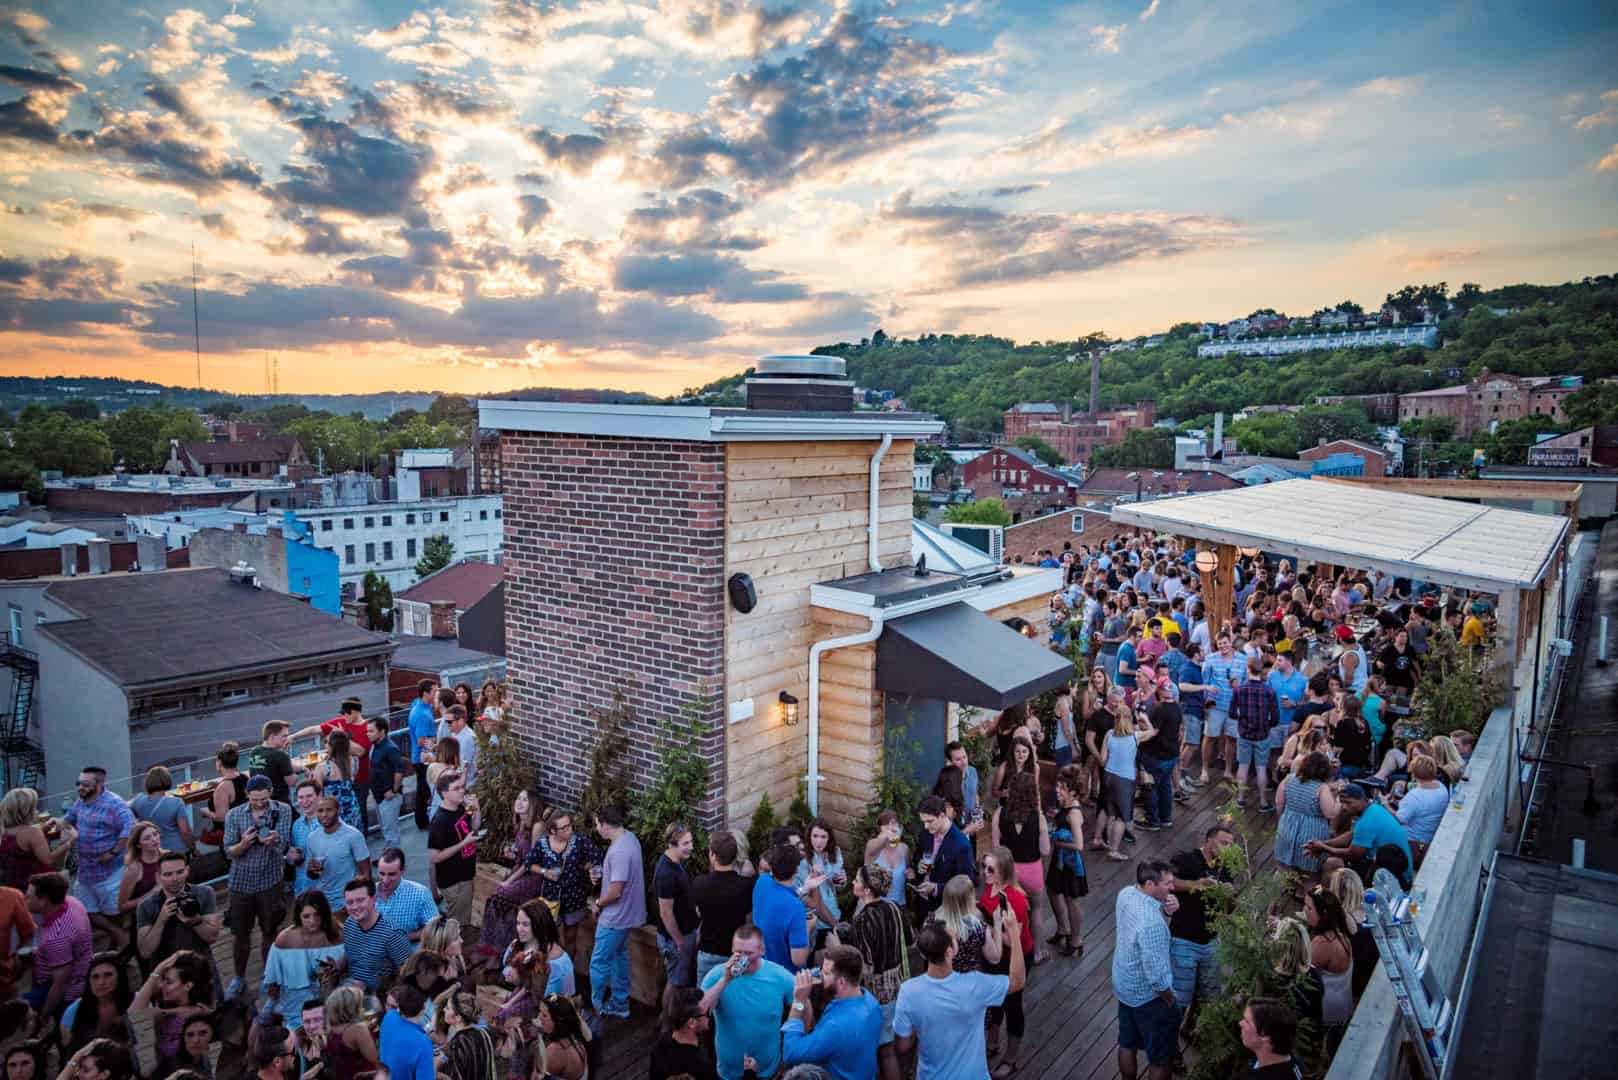 A look at the Rhinegeist rooftop space and surrounding views of OTR